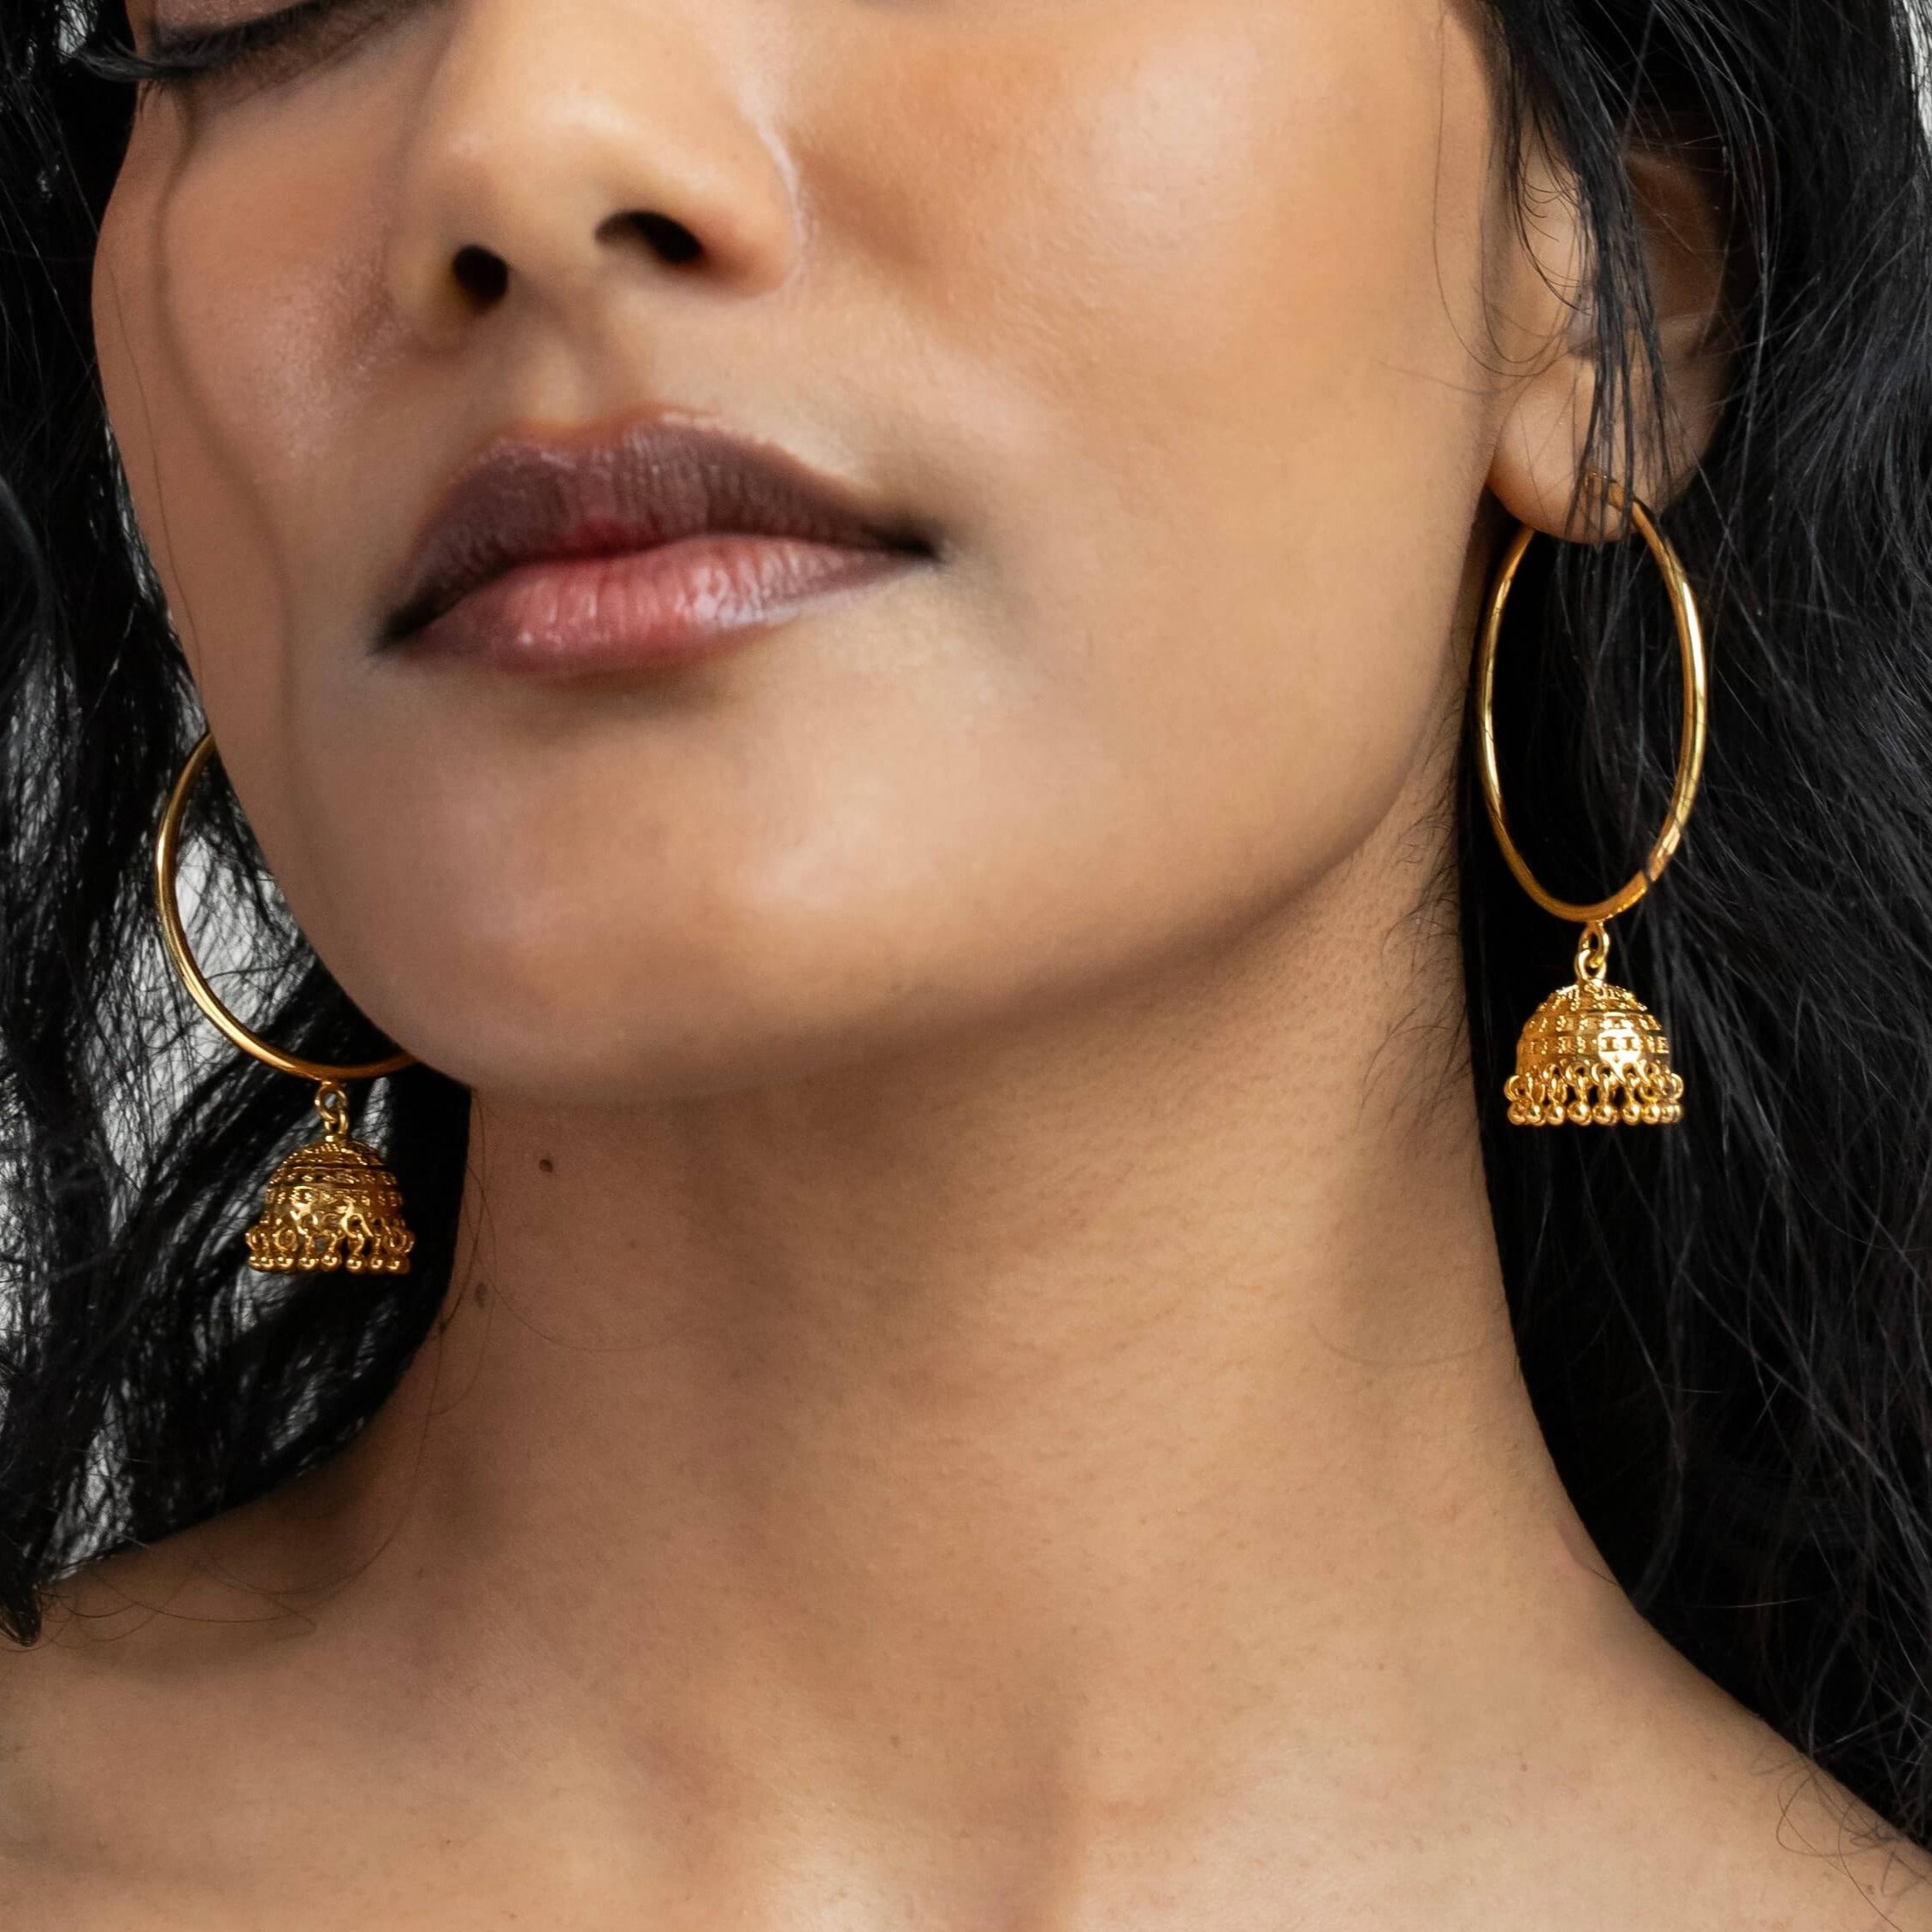 Adorn Your Ears: Your Go-To Guide for Earrings Styles, Trends, and Tips for  the Indian Fashionista